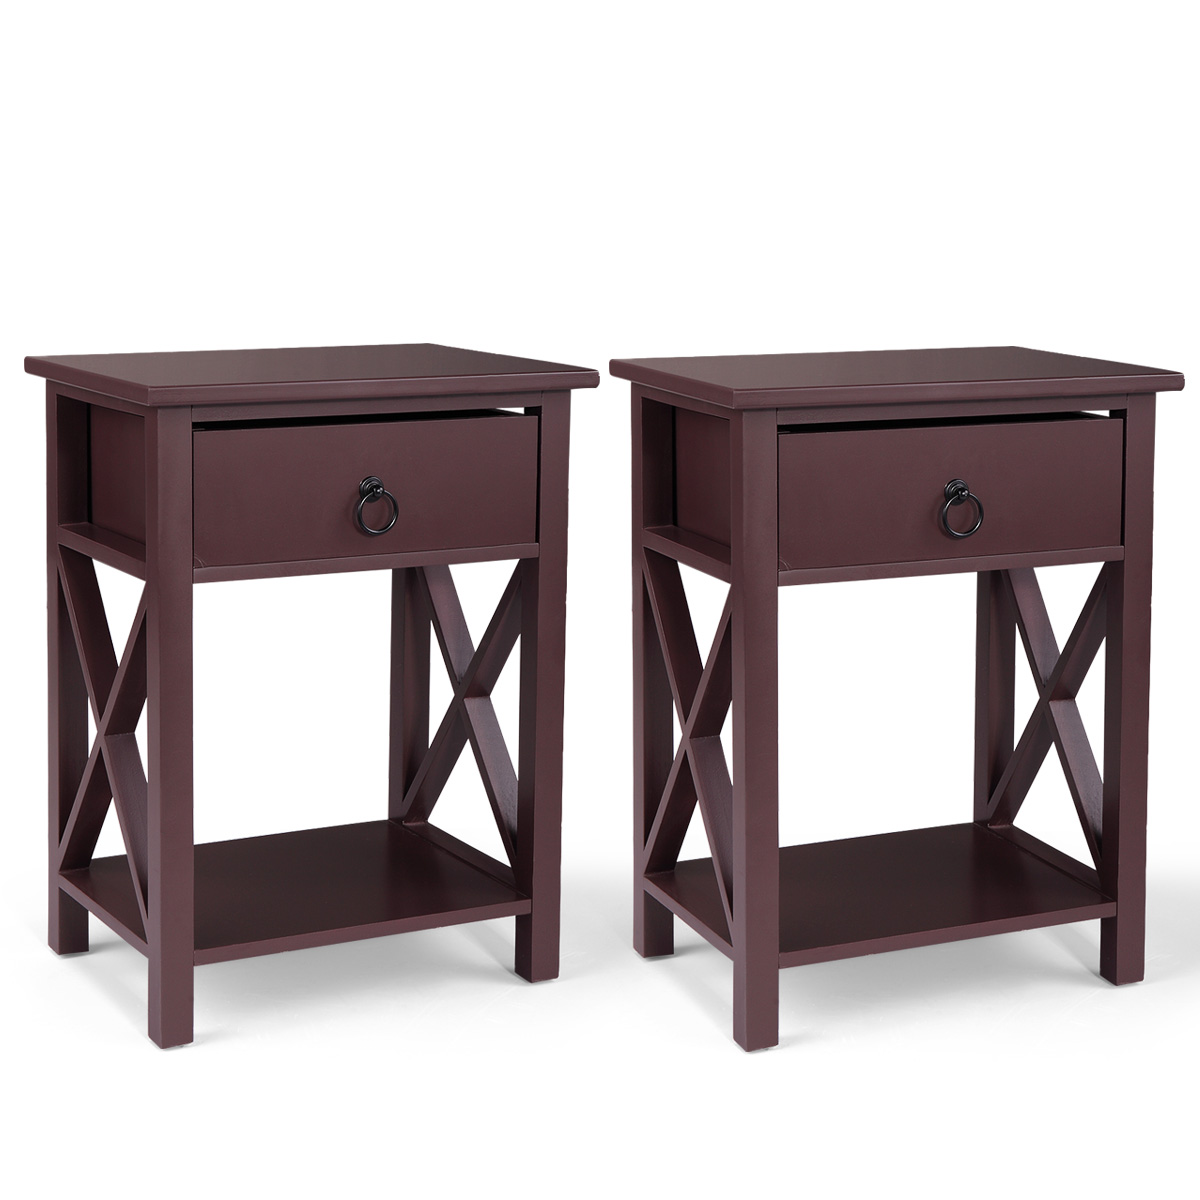 Set of 2 Wooden Nightstand, X-Shaped Sofa Side Table, End Table with Drawer, Bedroom Living Room Furniture, Brown-CASAINC